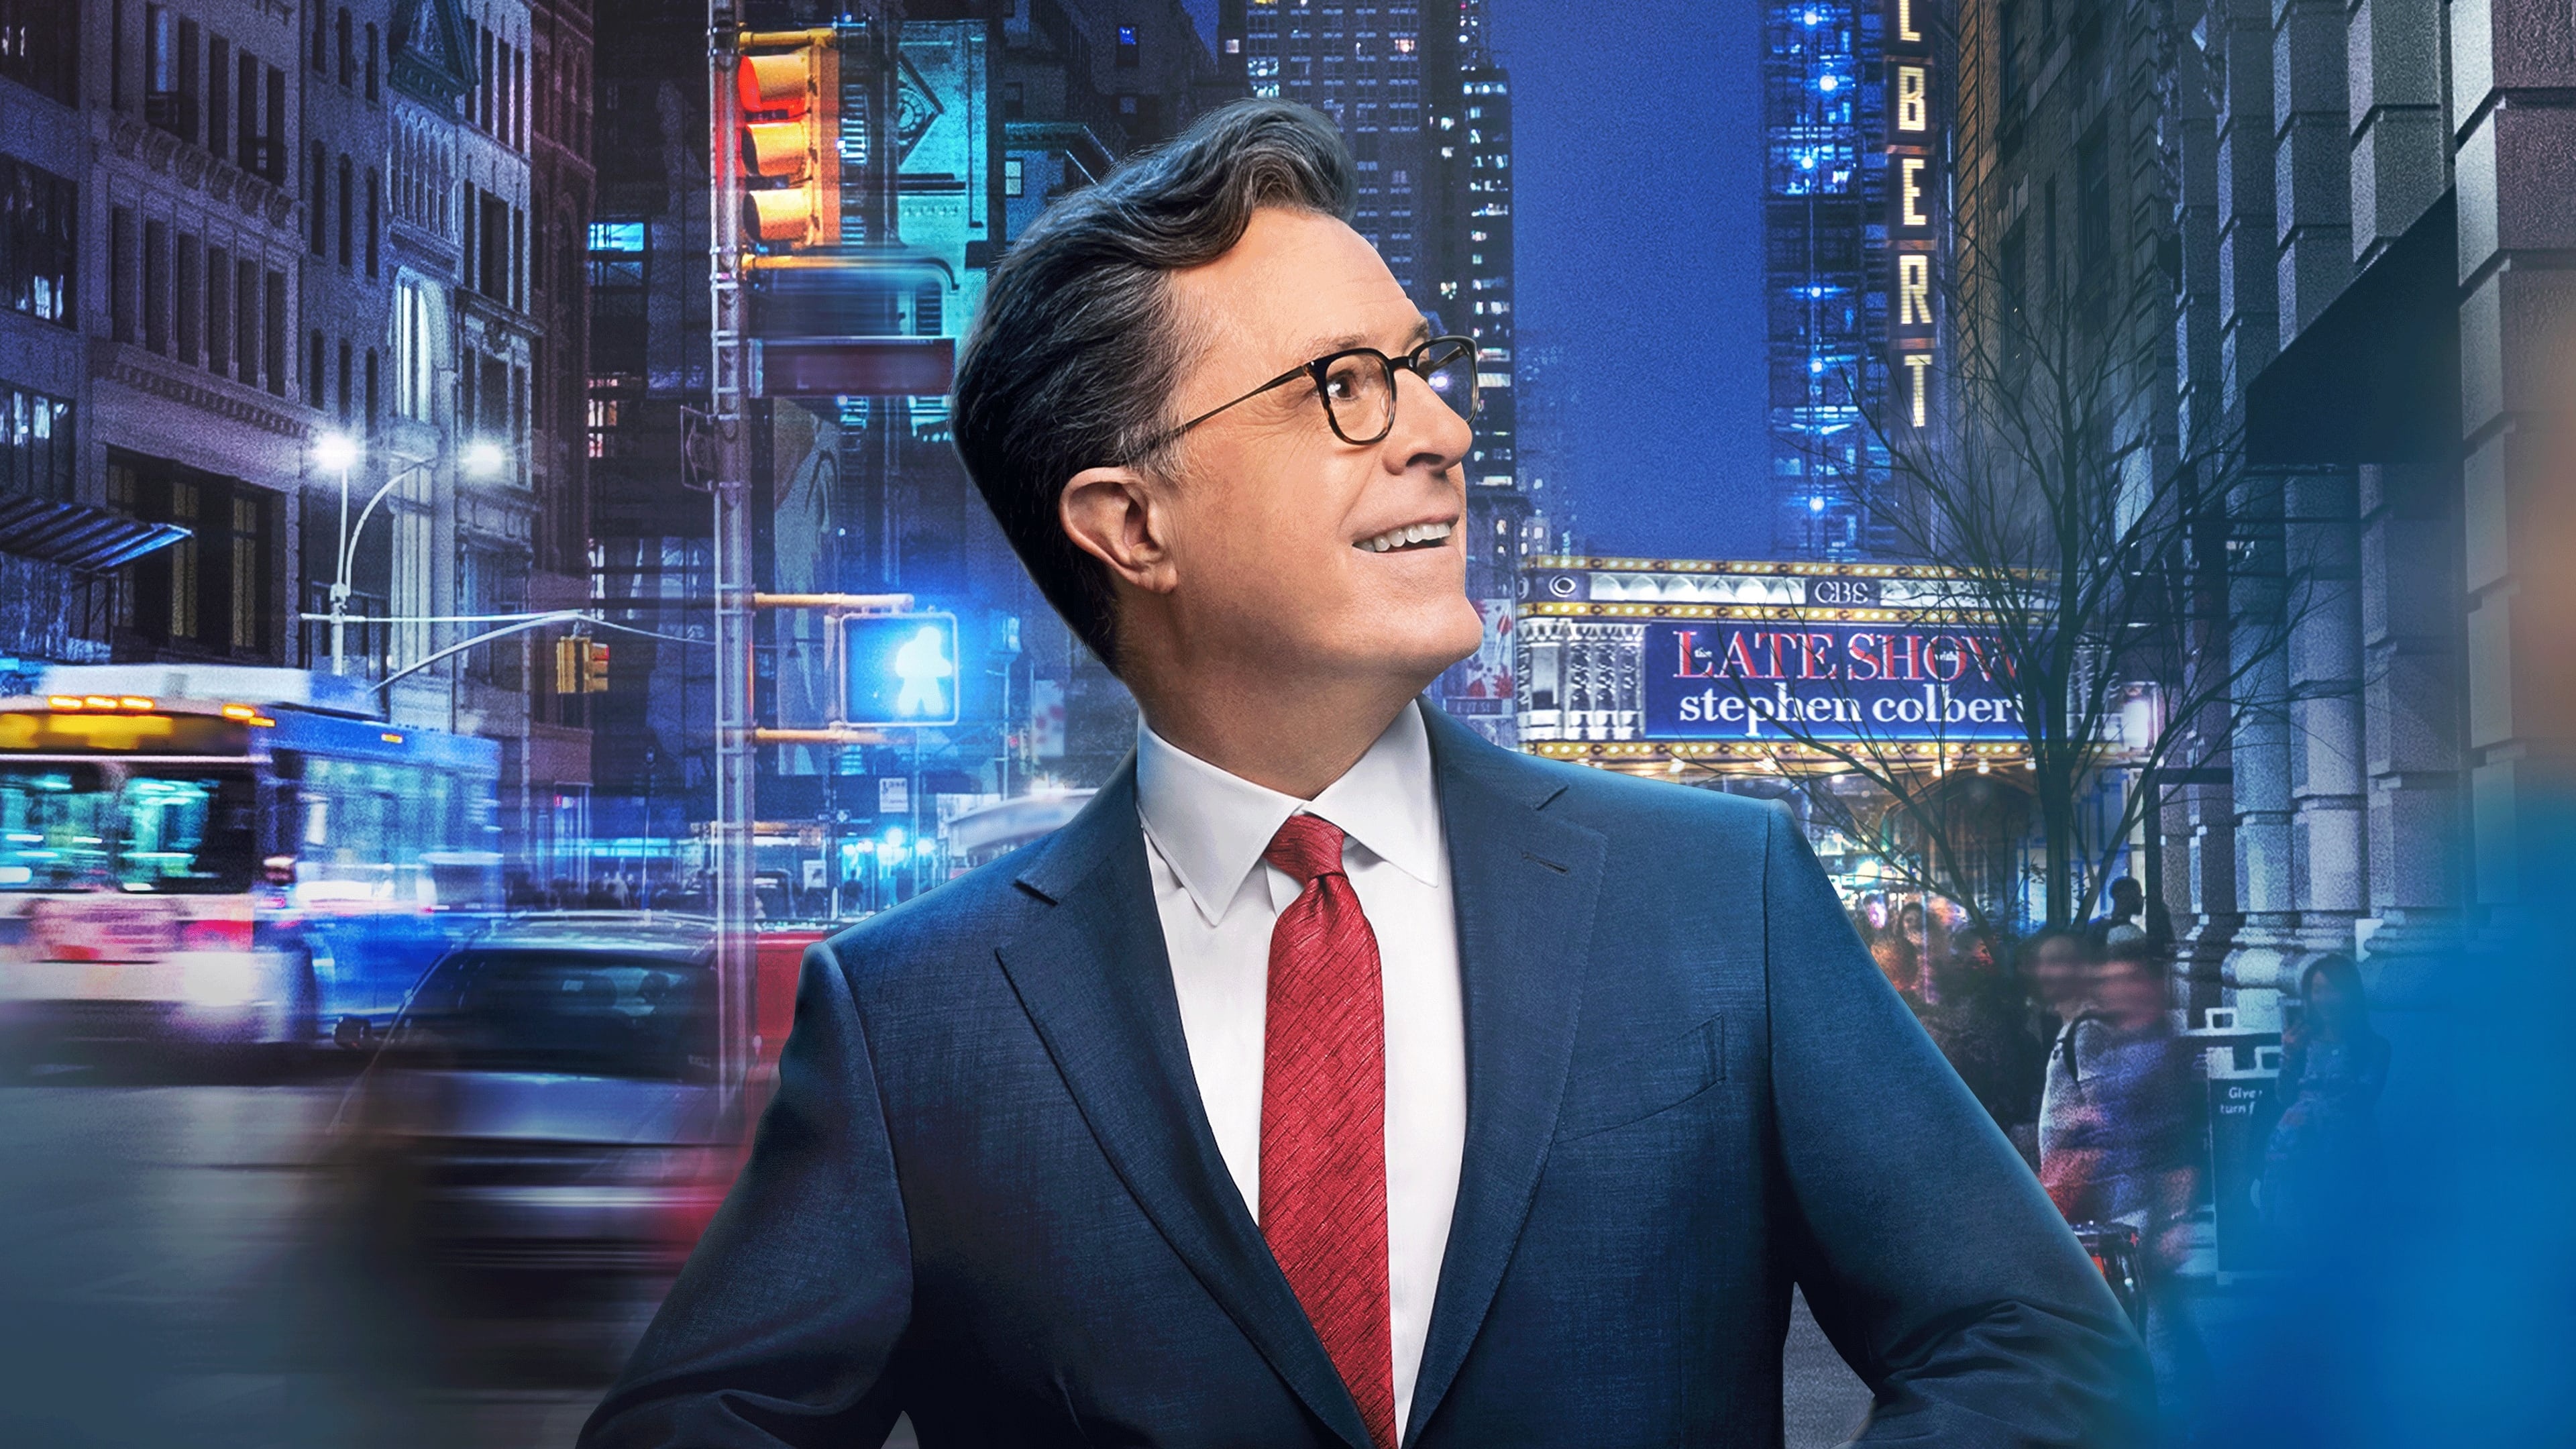 Late Show with Stephen Colbert, TV series backdrop, 2015 release, Entertainment database, 3840x2160 4K Desktop